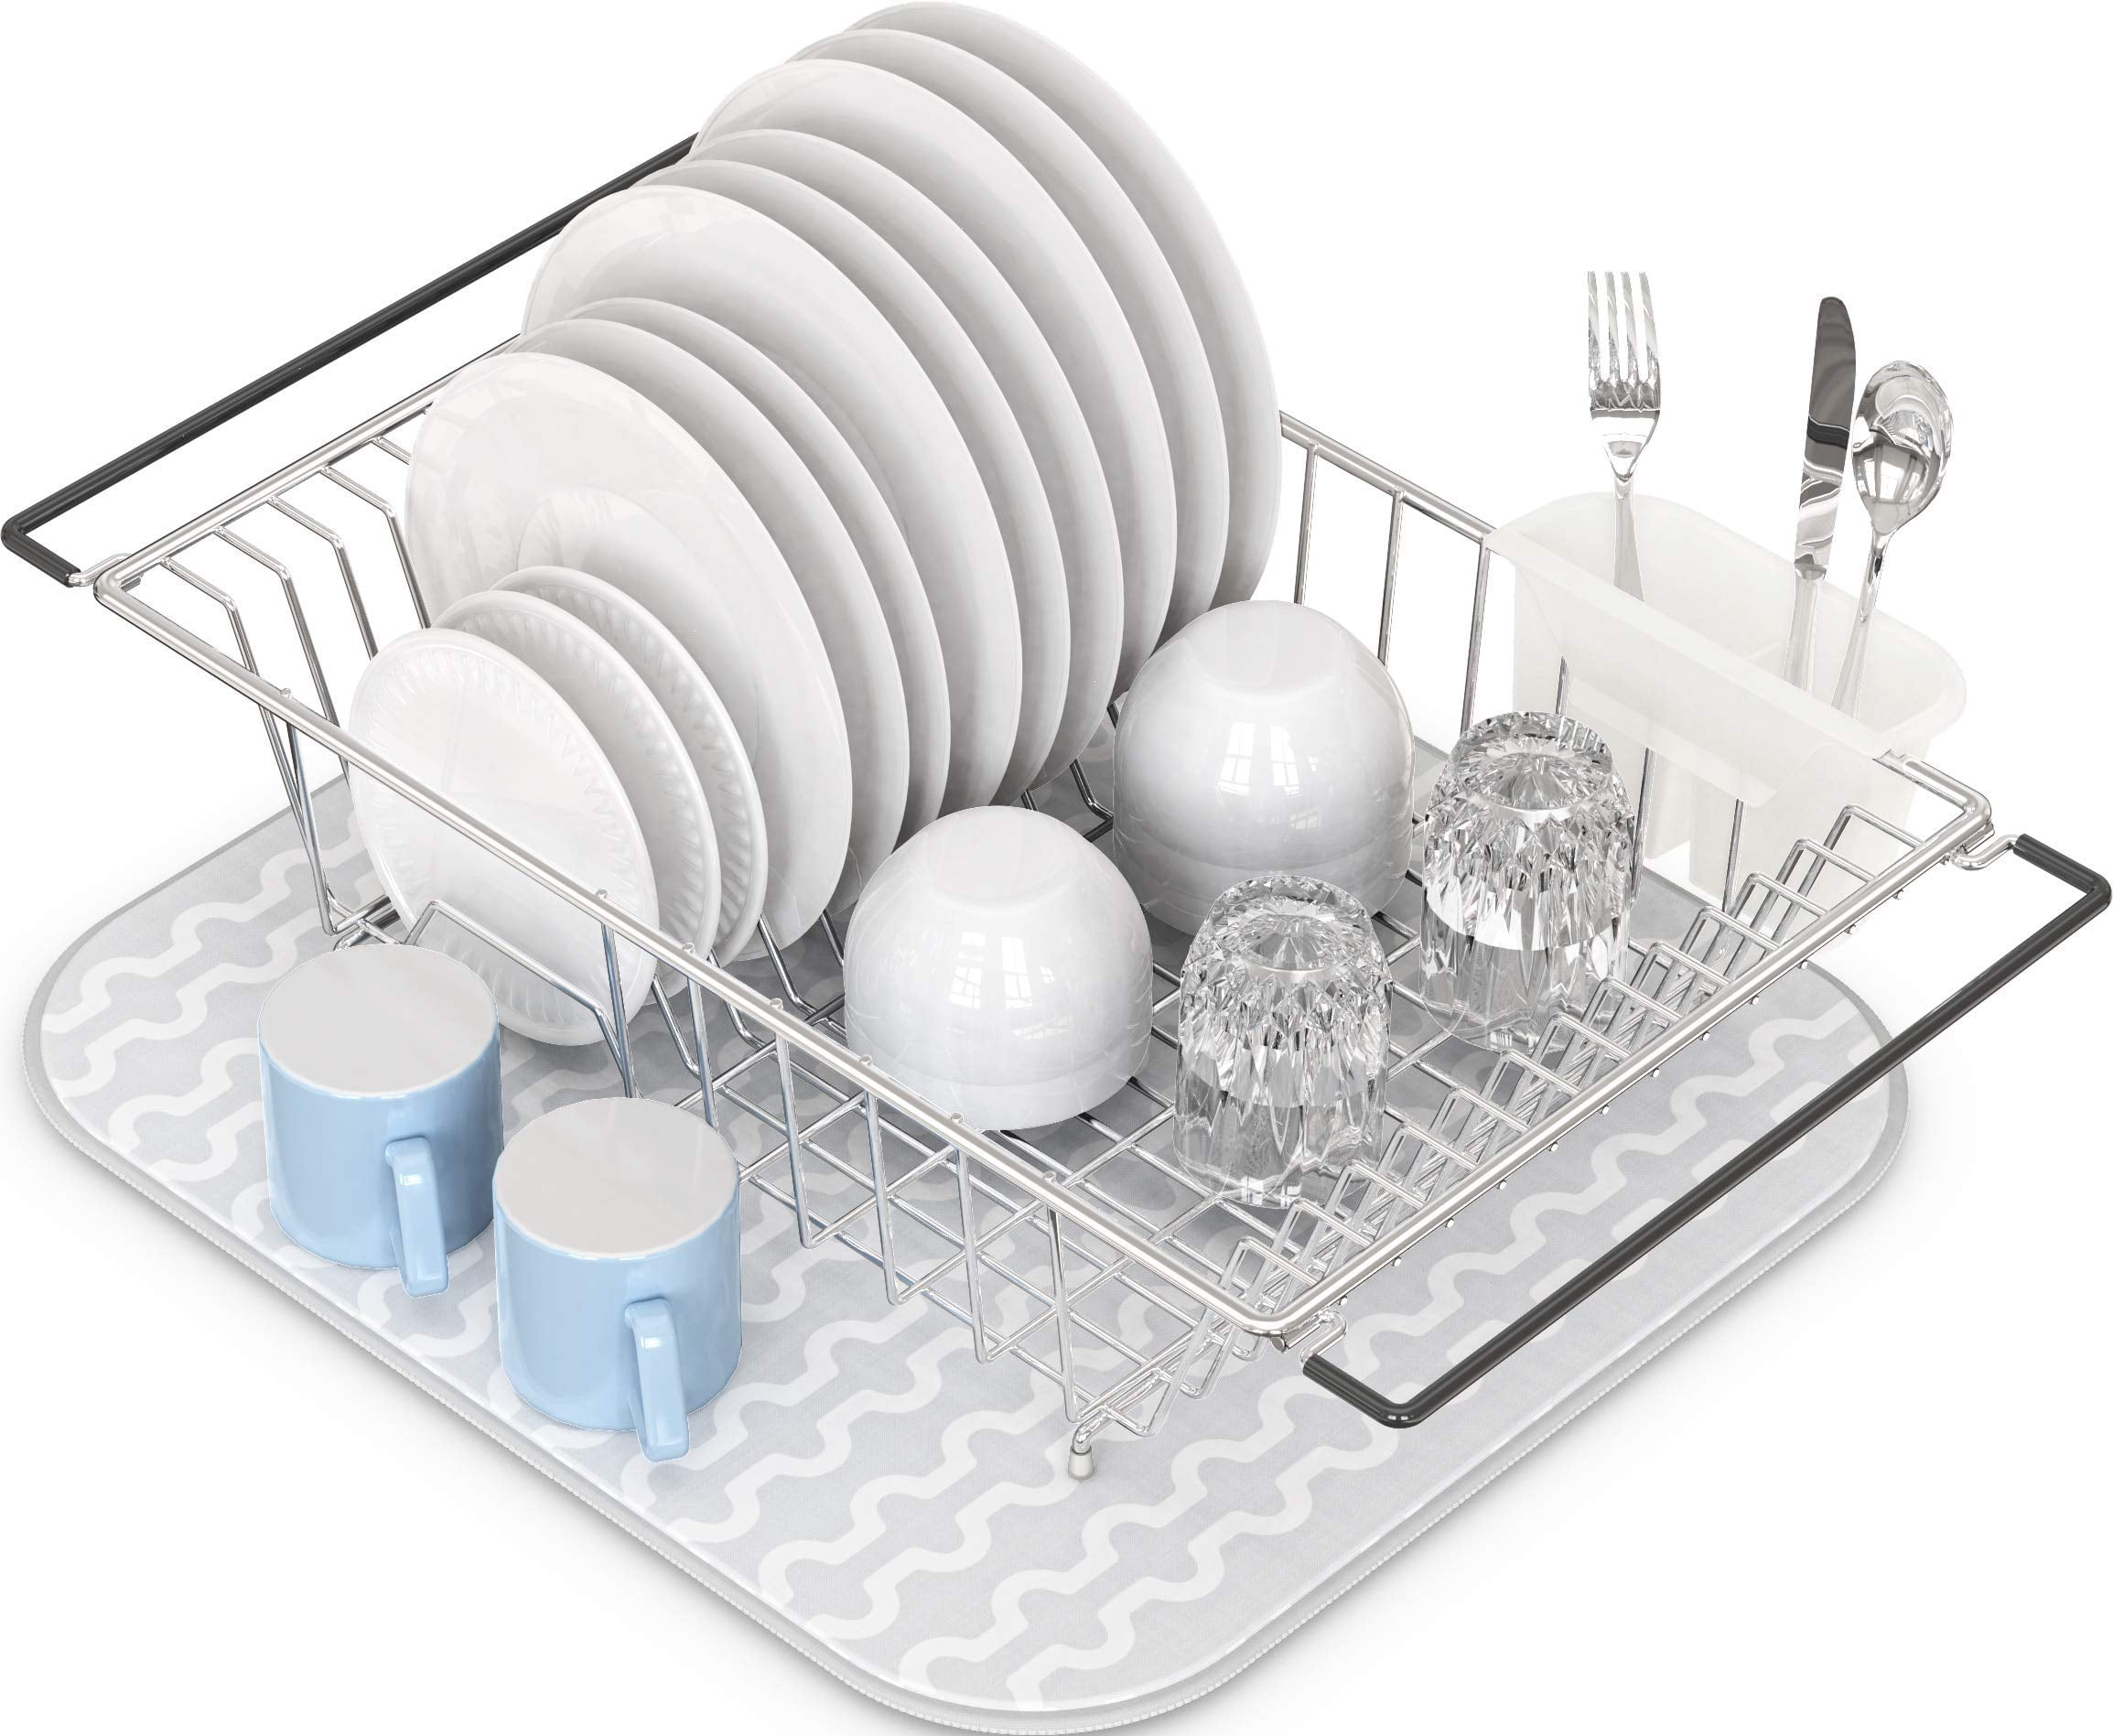  Simple Houseware Collapsible Alloy Steel Dish Drying Rack w/Dish  Mat for Storage, Chrome